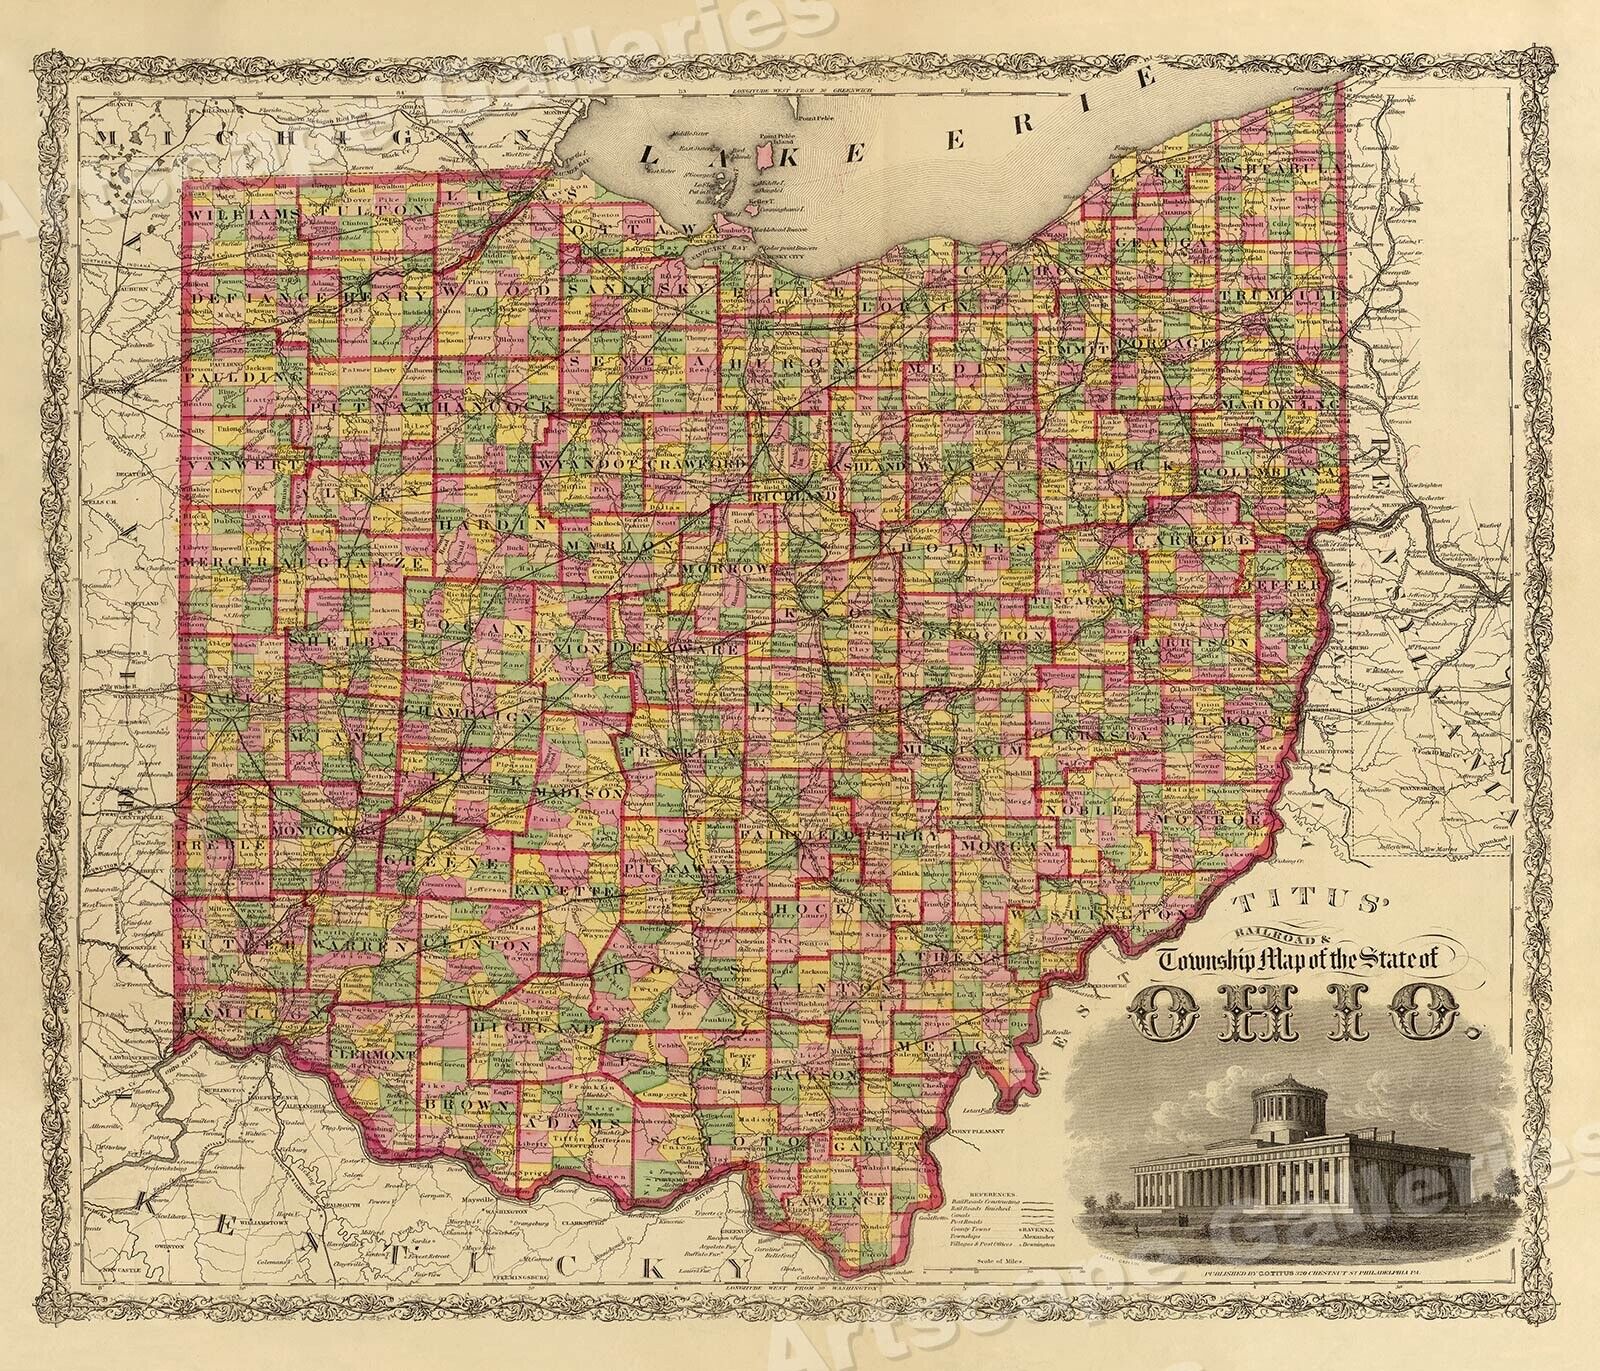 1860s “Township Map of the State of Ohio” Vintage Style US Map - 16x20